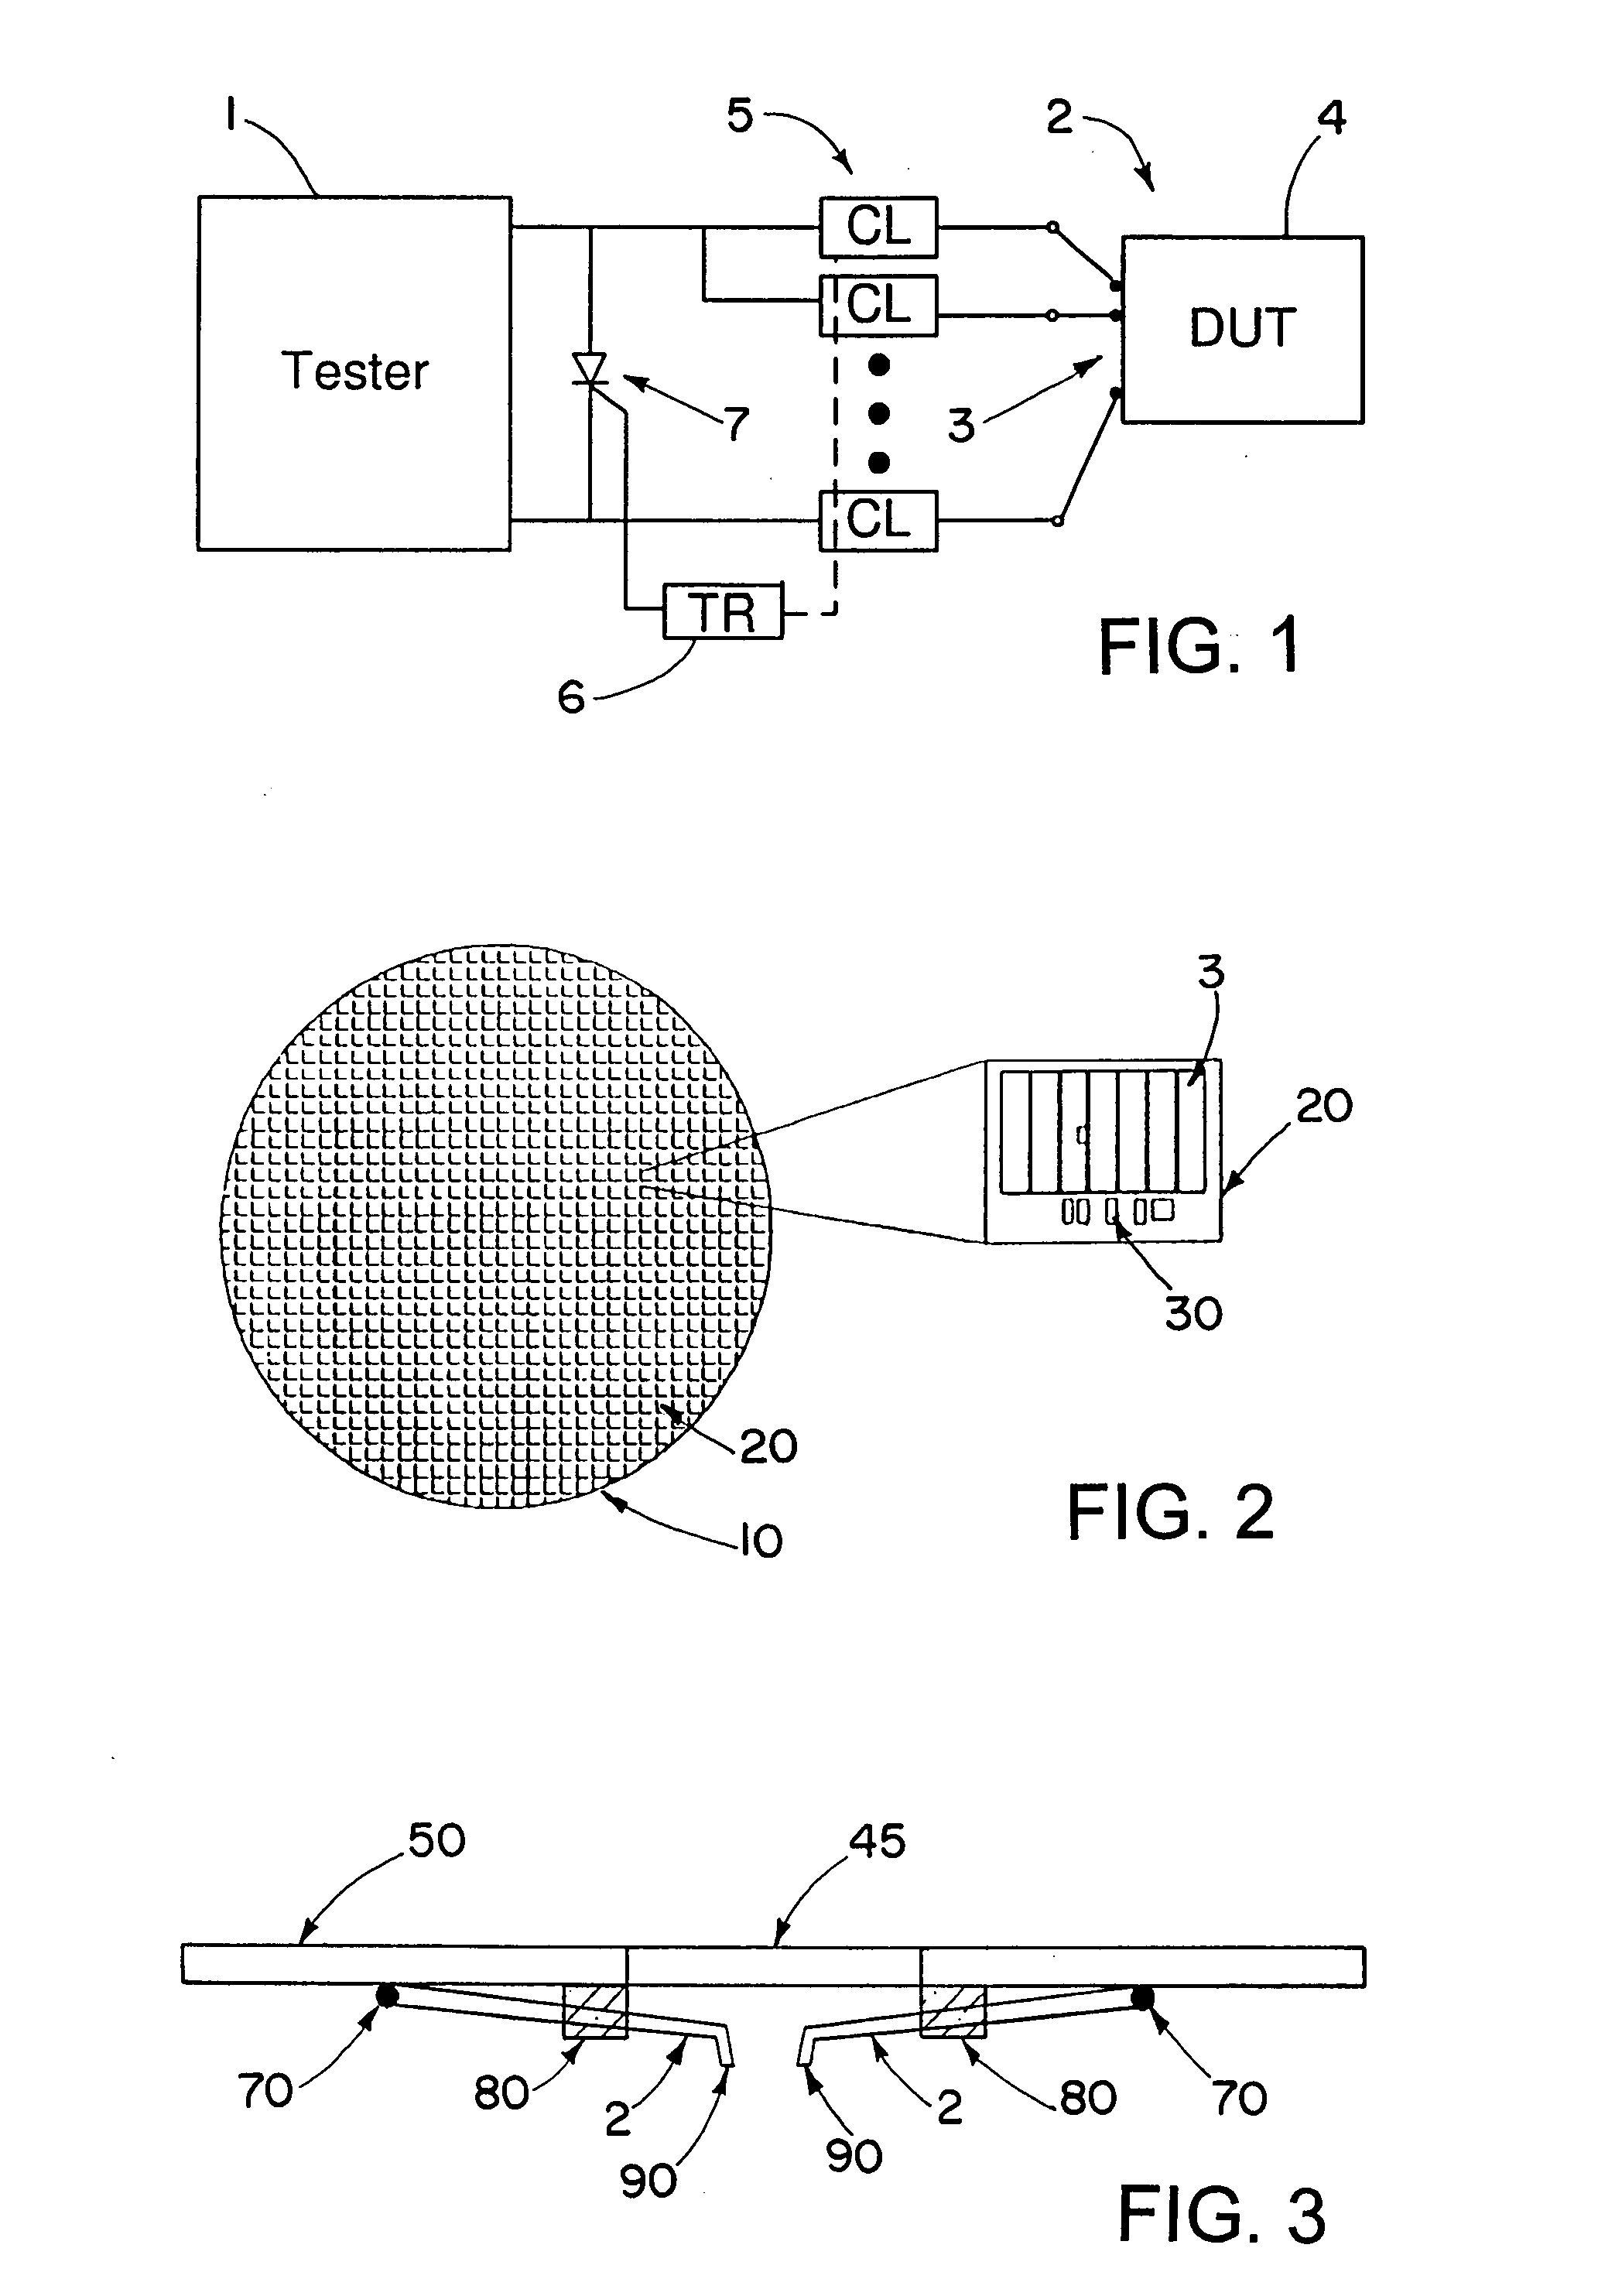 Probe needle protection method for high current probe testing of power devices